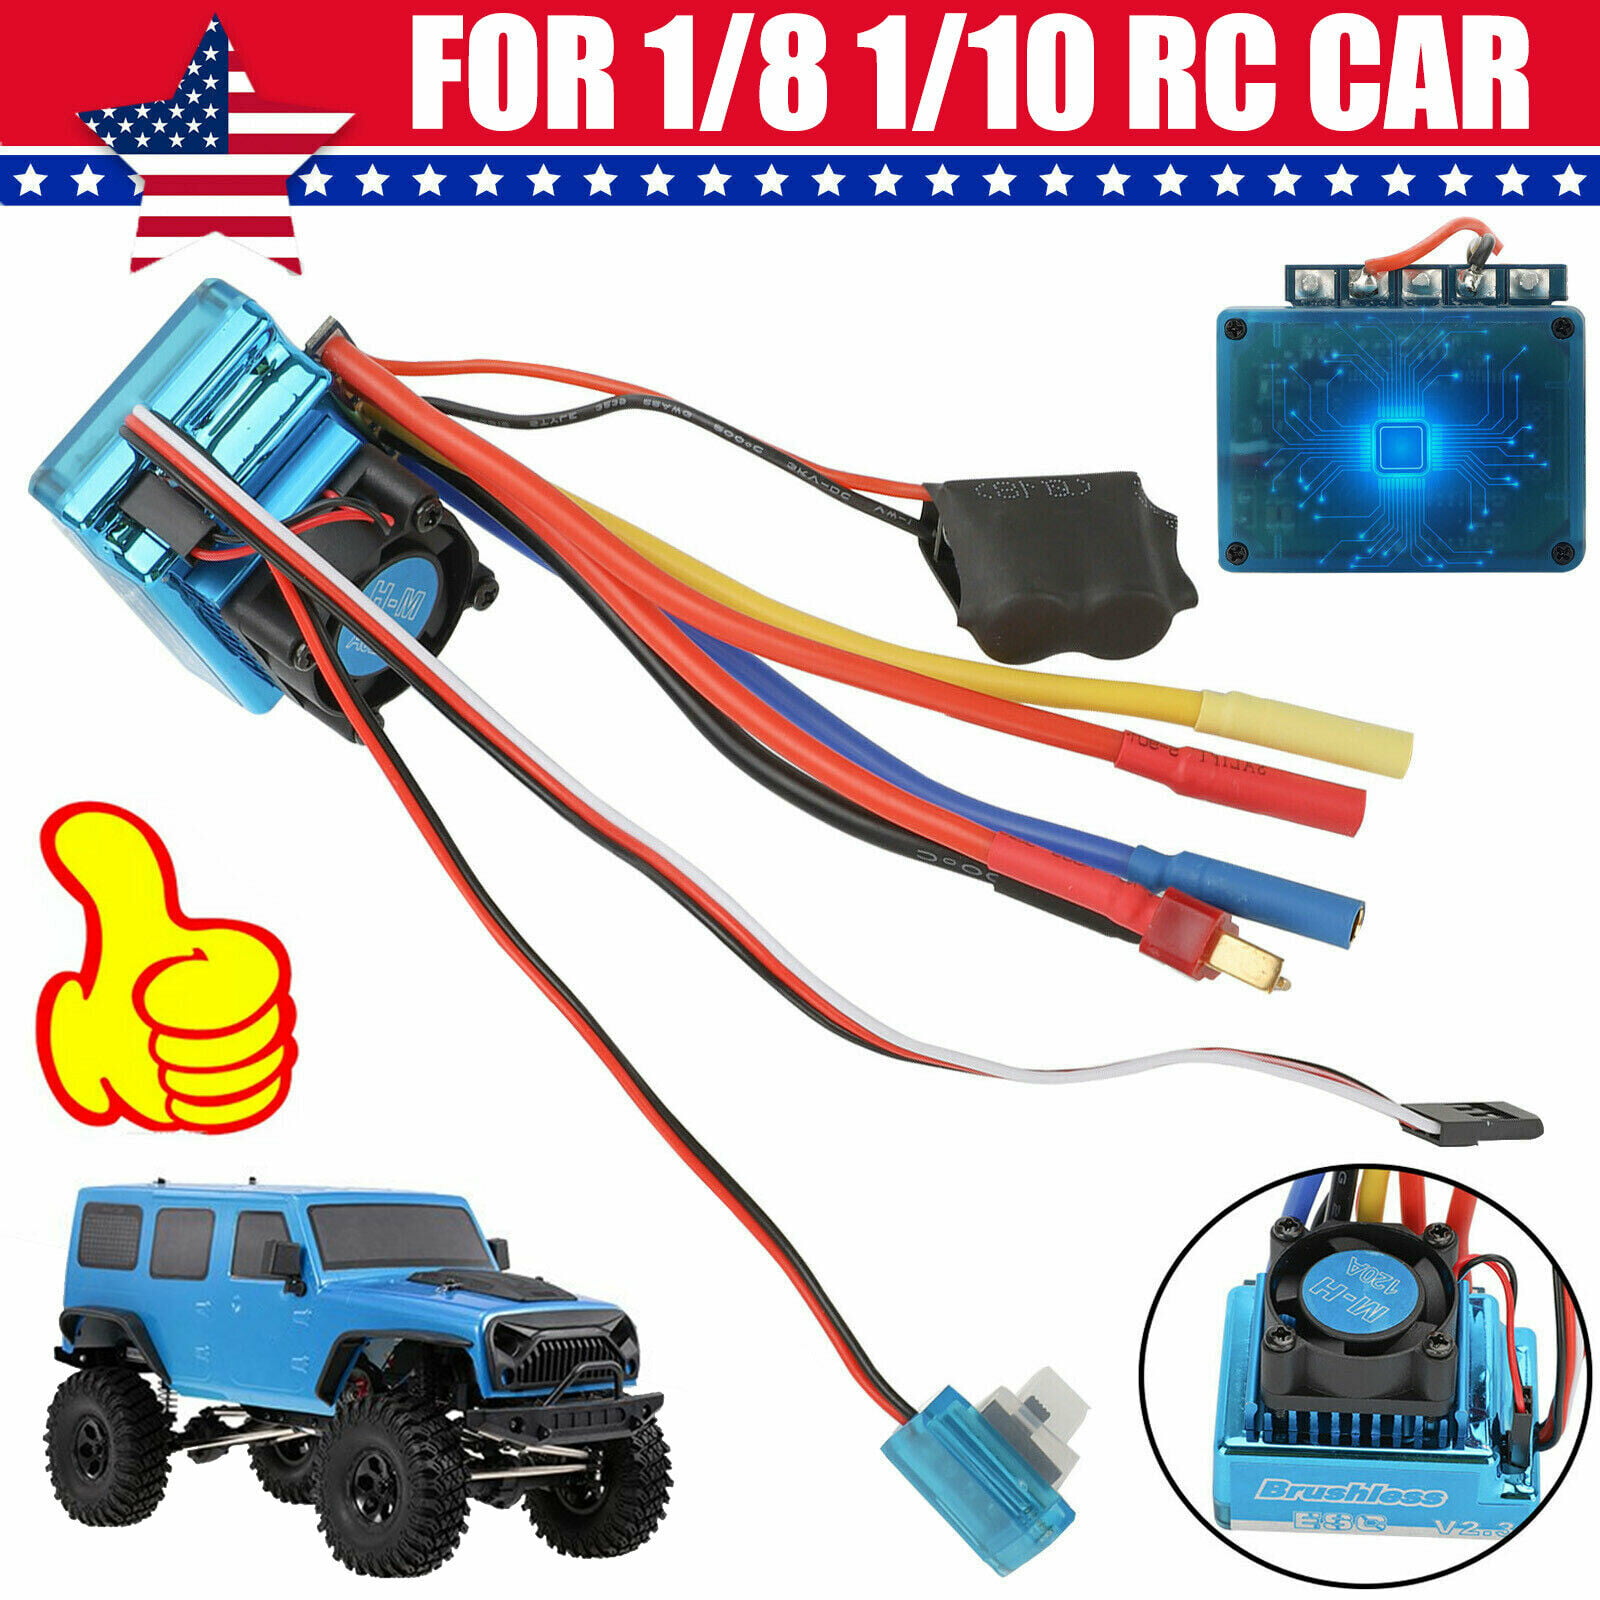 Walmeck 120A Brushless ESC Electric Speed Controller 6.0V/3A BEC for 1/8 1/10 RC Car